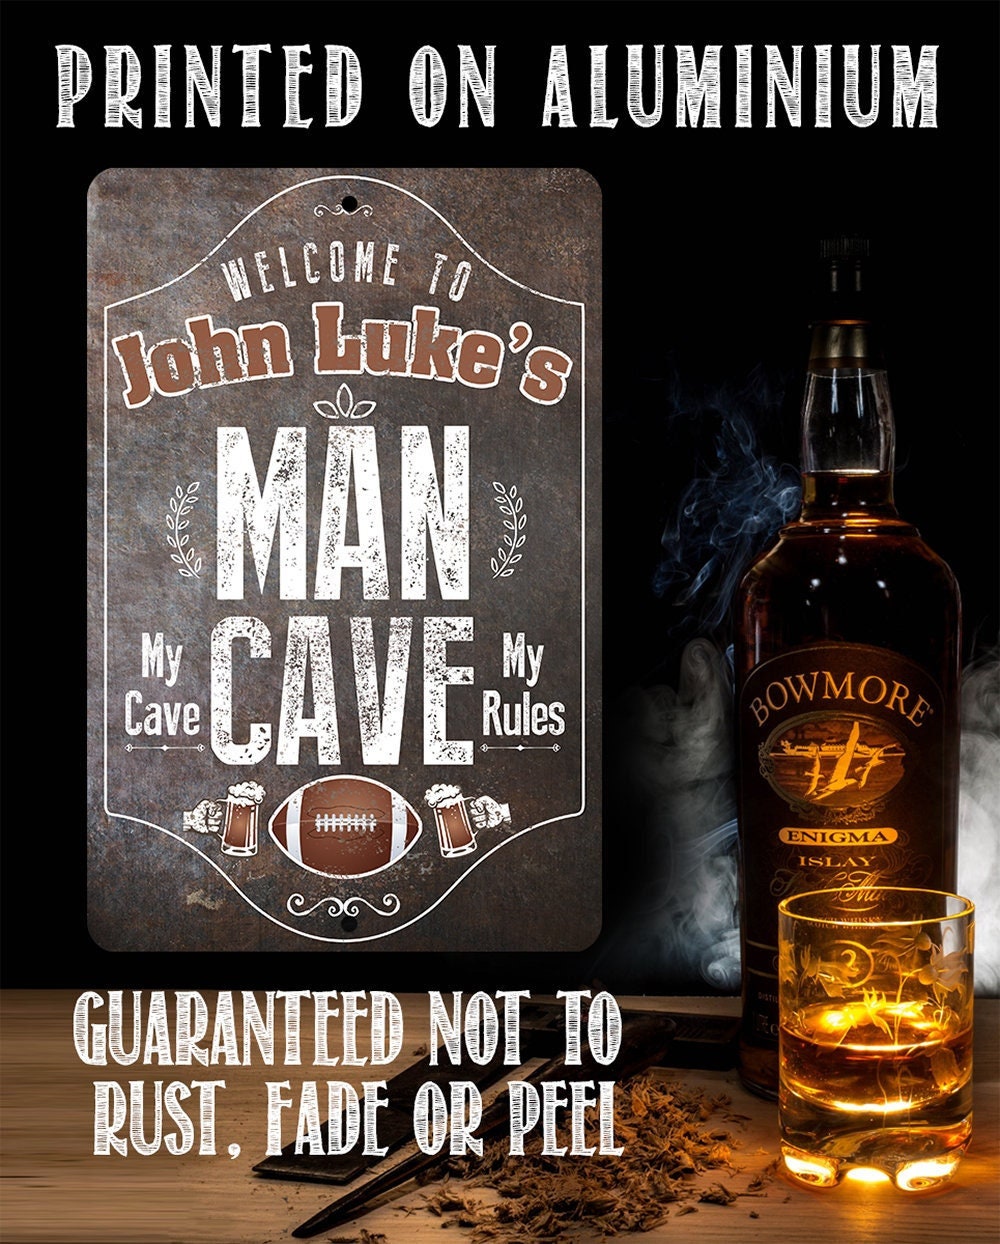 Personalized - Man Cave, My Cave, My Rules - Metal Sign Metal Sign Lone Star Art 